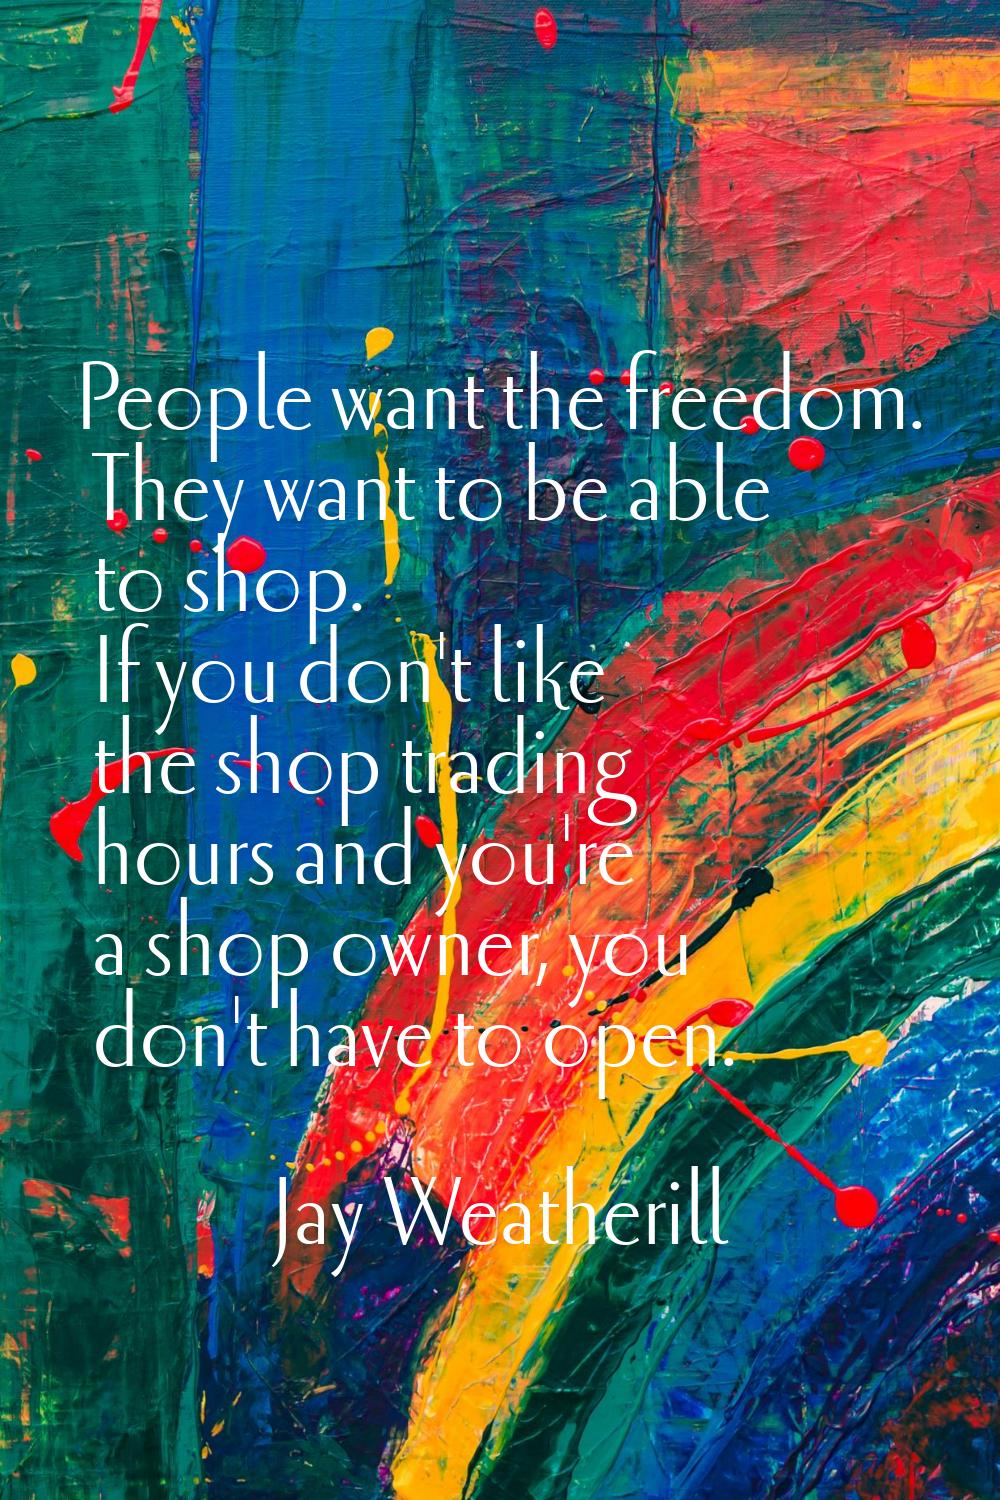 People want the freedom. They want to be able to shop. If you don't like the shop trading hours and